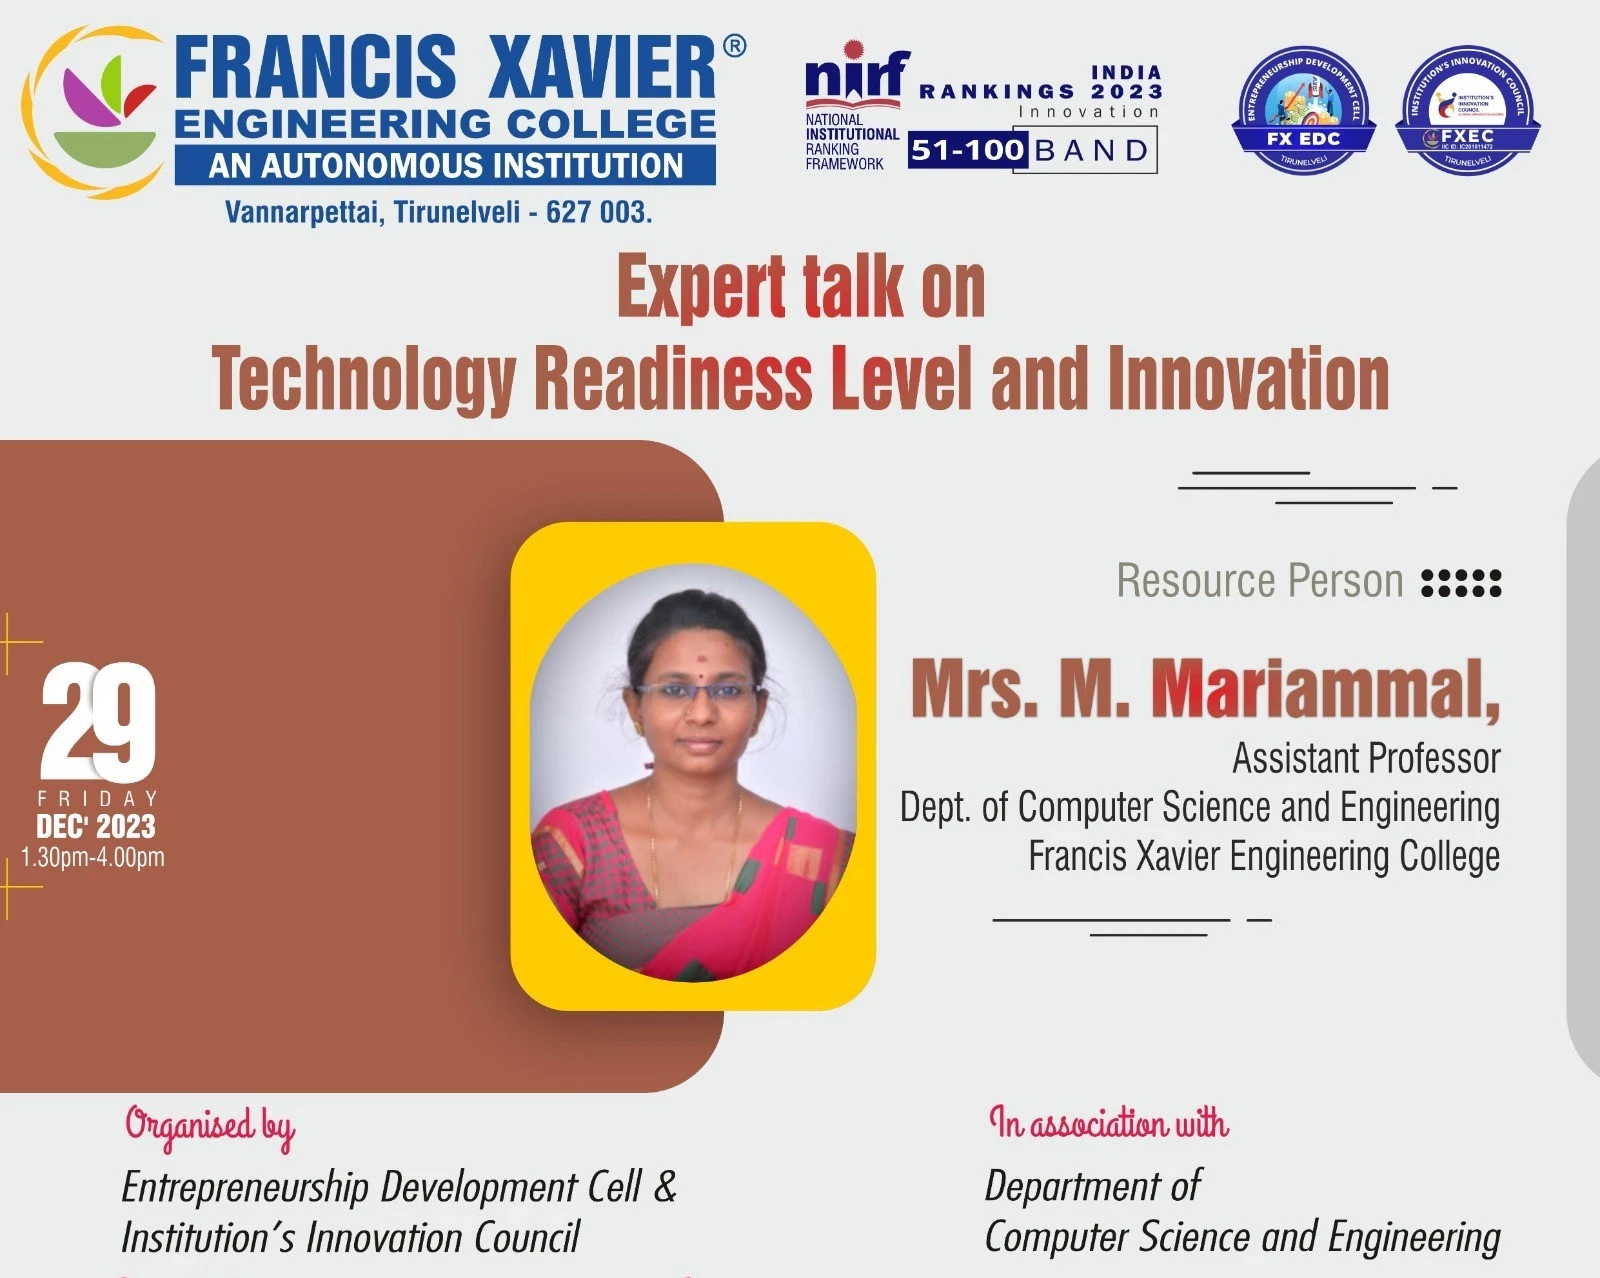 Expert talk on Technology Readiness Level and Innovation